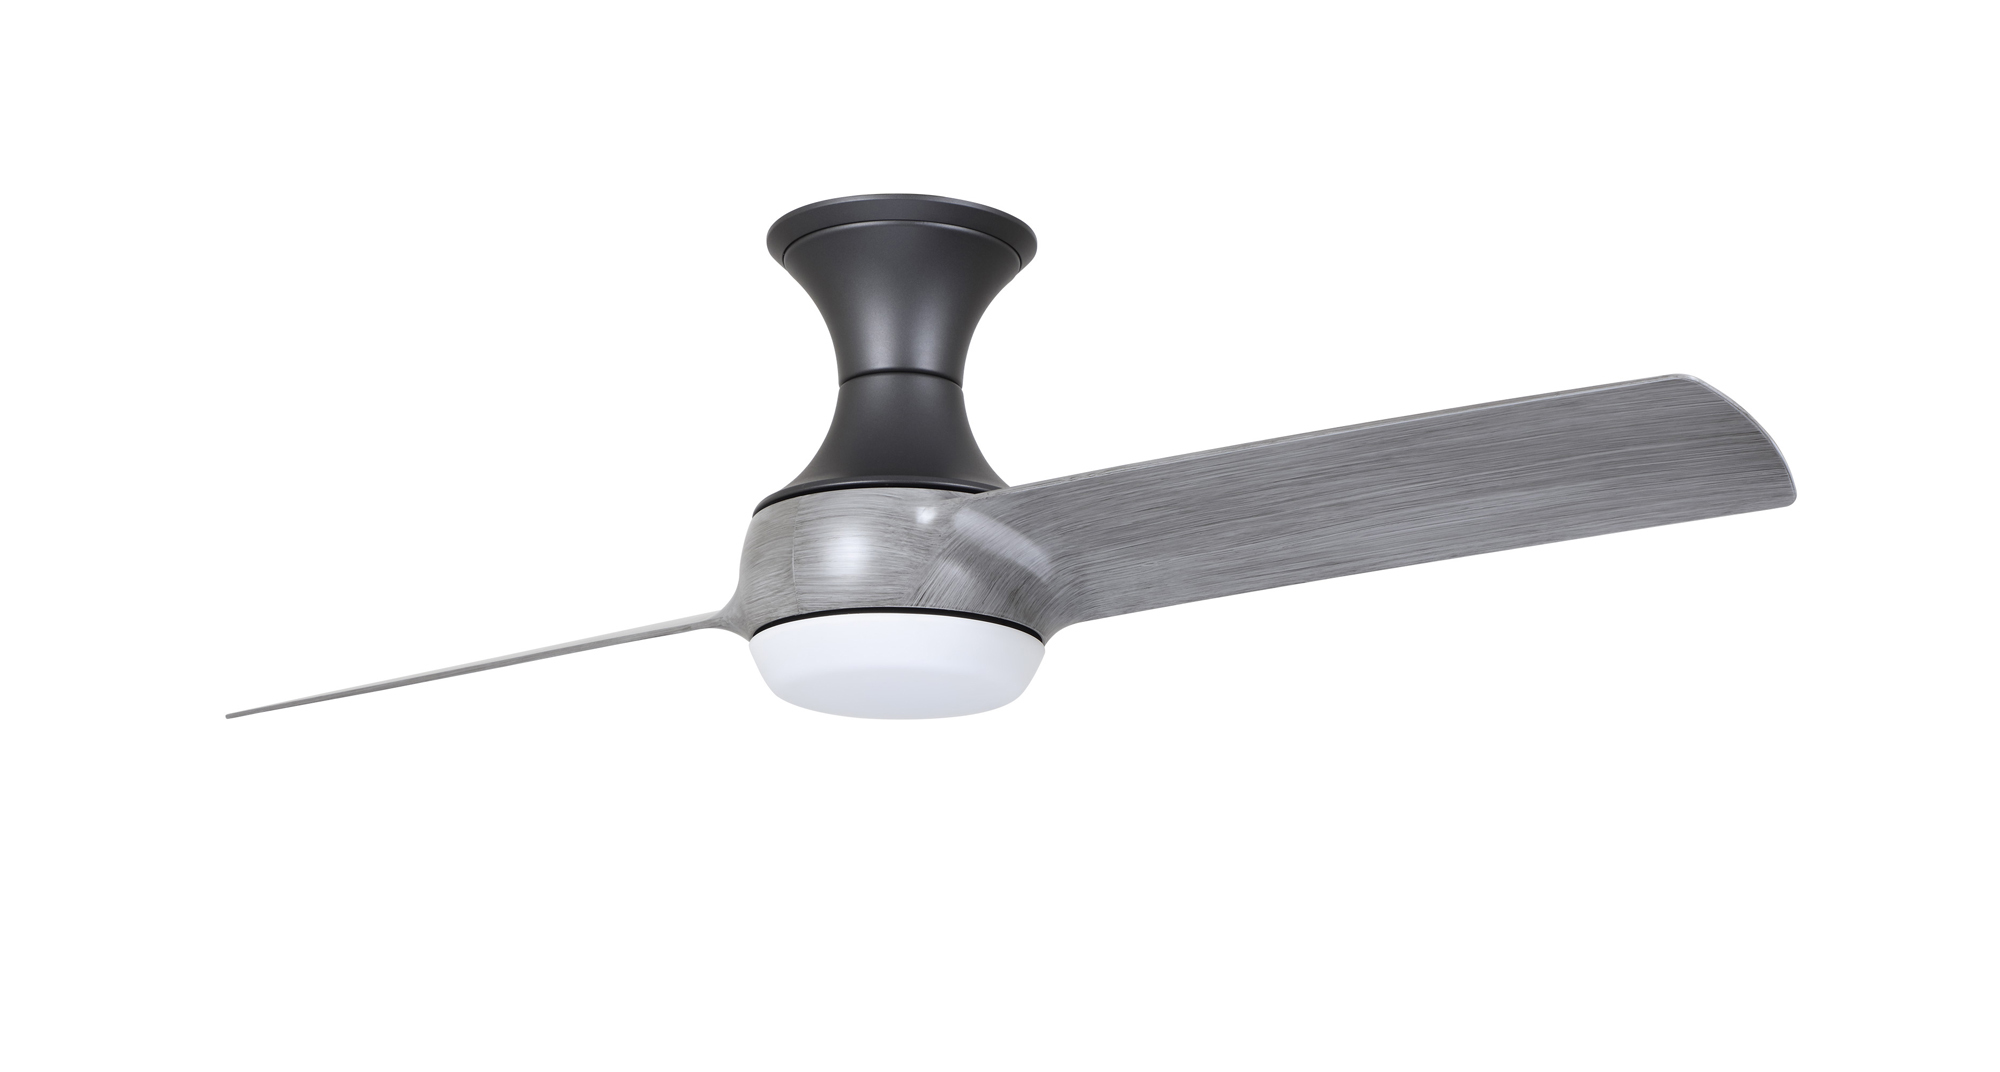 Duo Flush Ceiling Fan With Light By Emerson Ceiling Fans